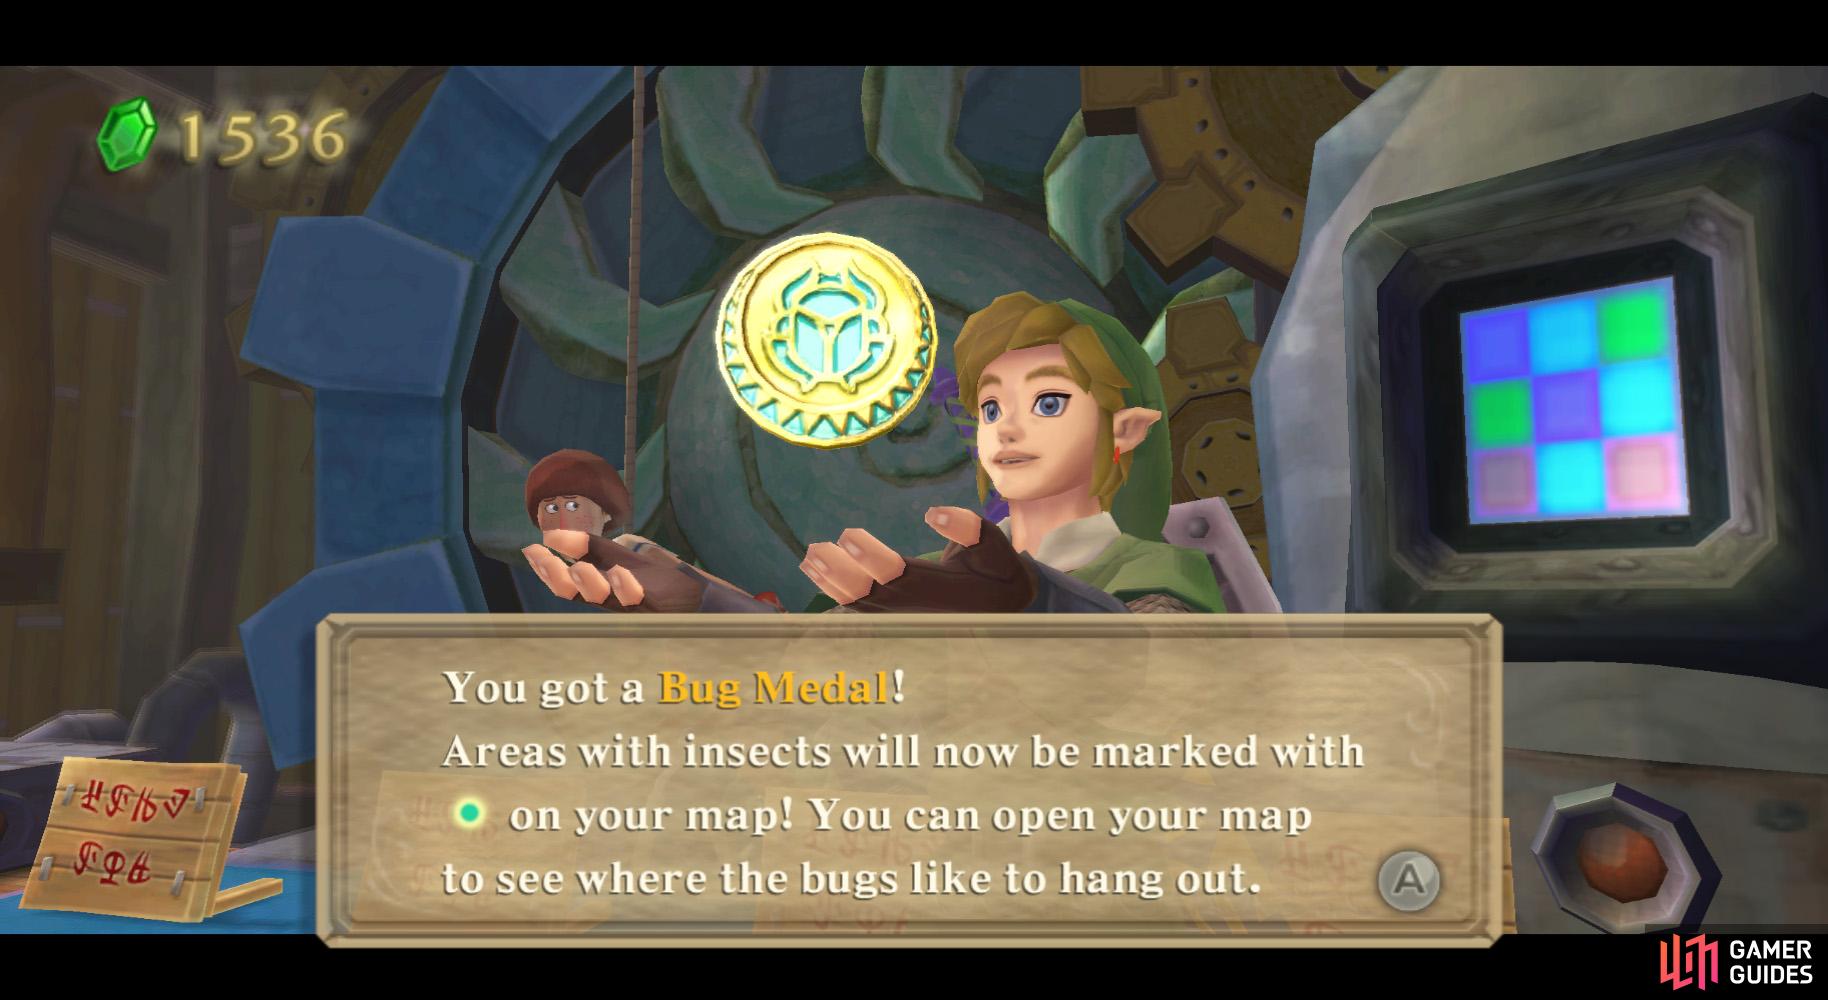 The Bug Medal's one sale in Beedle's Airshop.